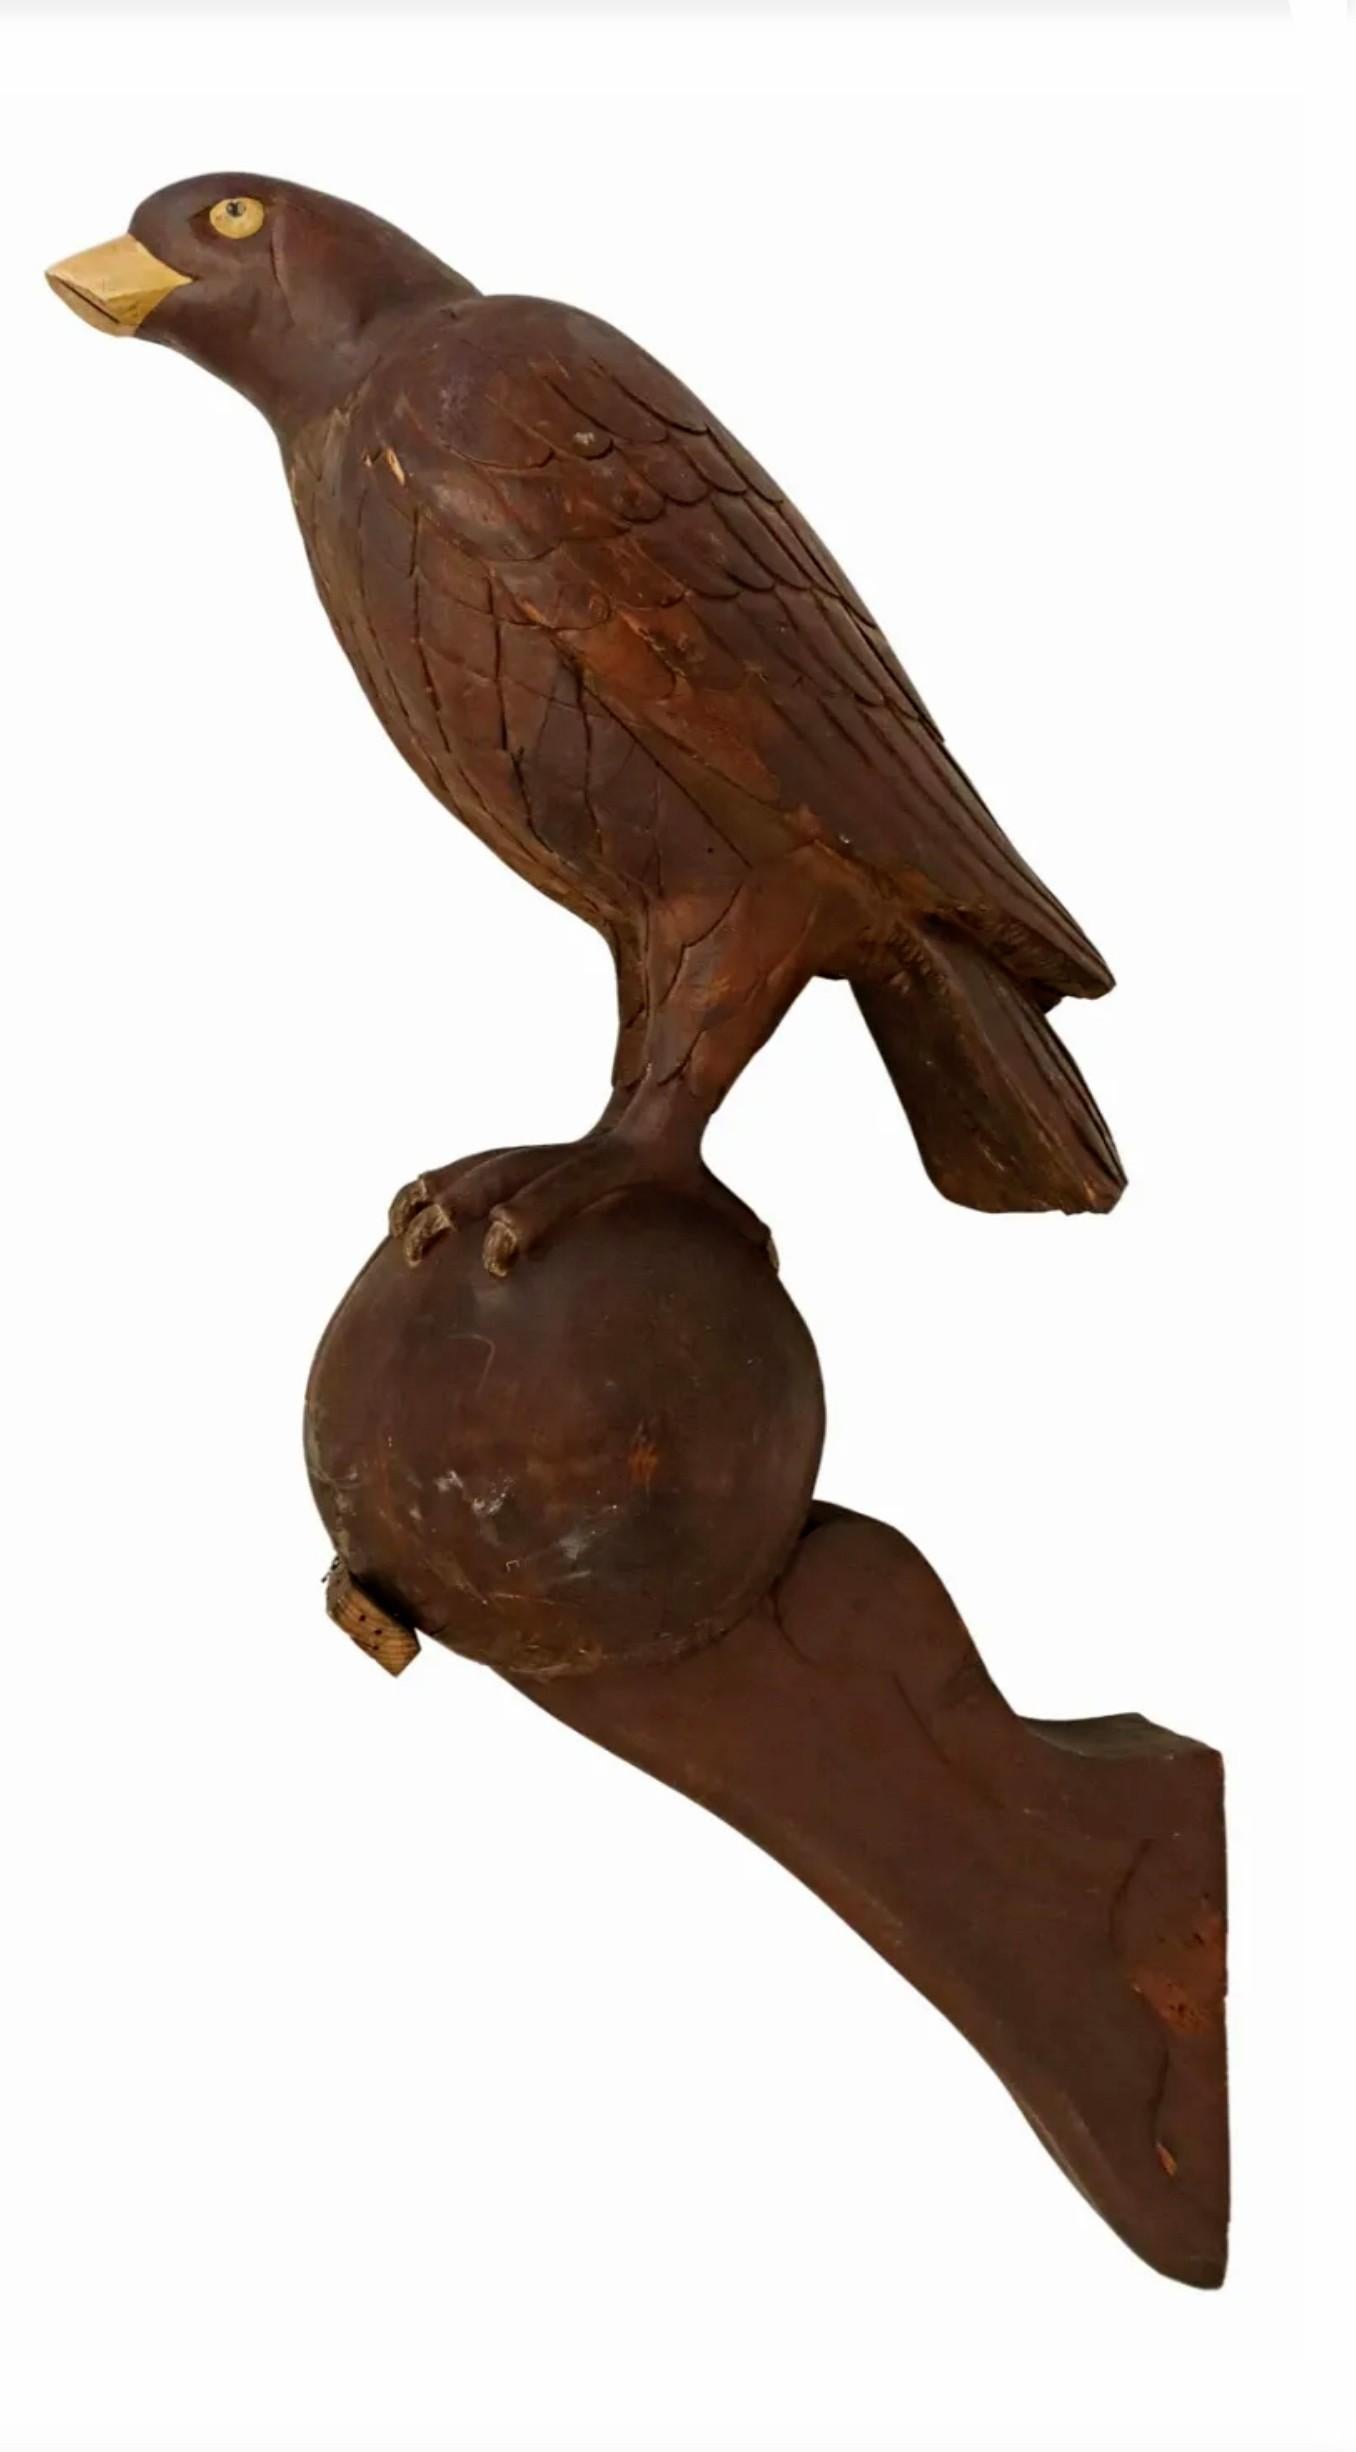 Hand-Carved Monumental Antique Architectural Wood Carving Perched Eagle Bird For Sale